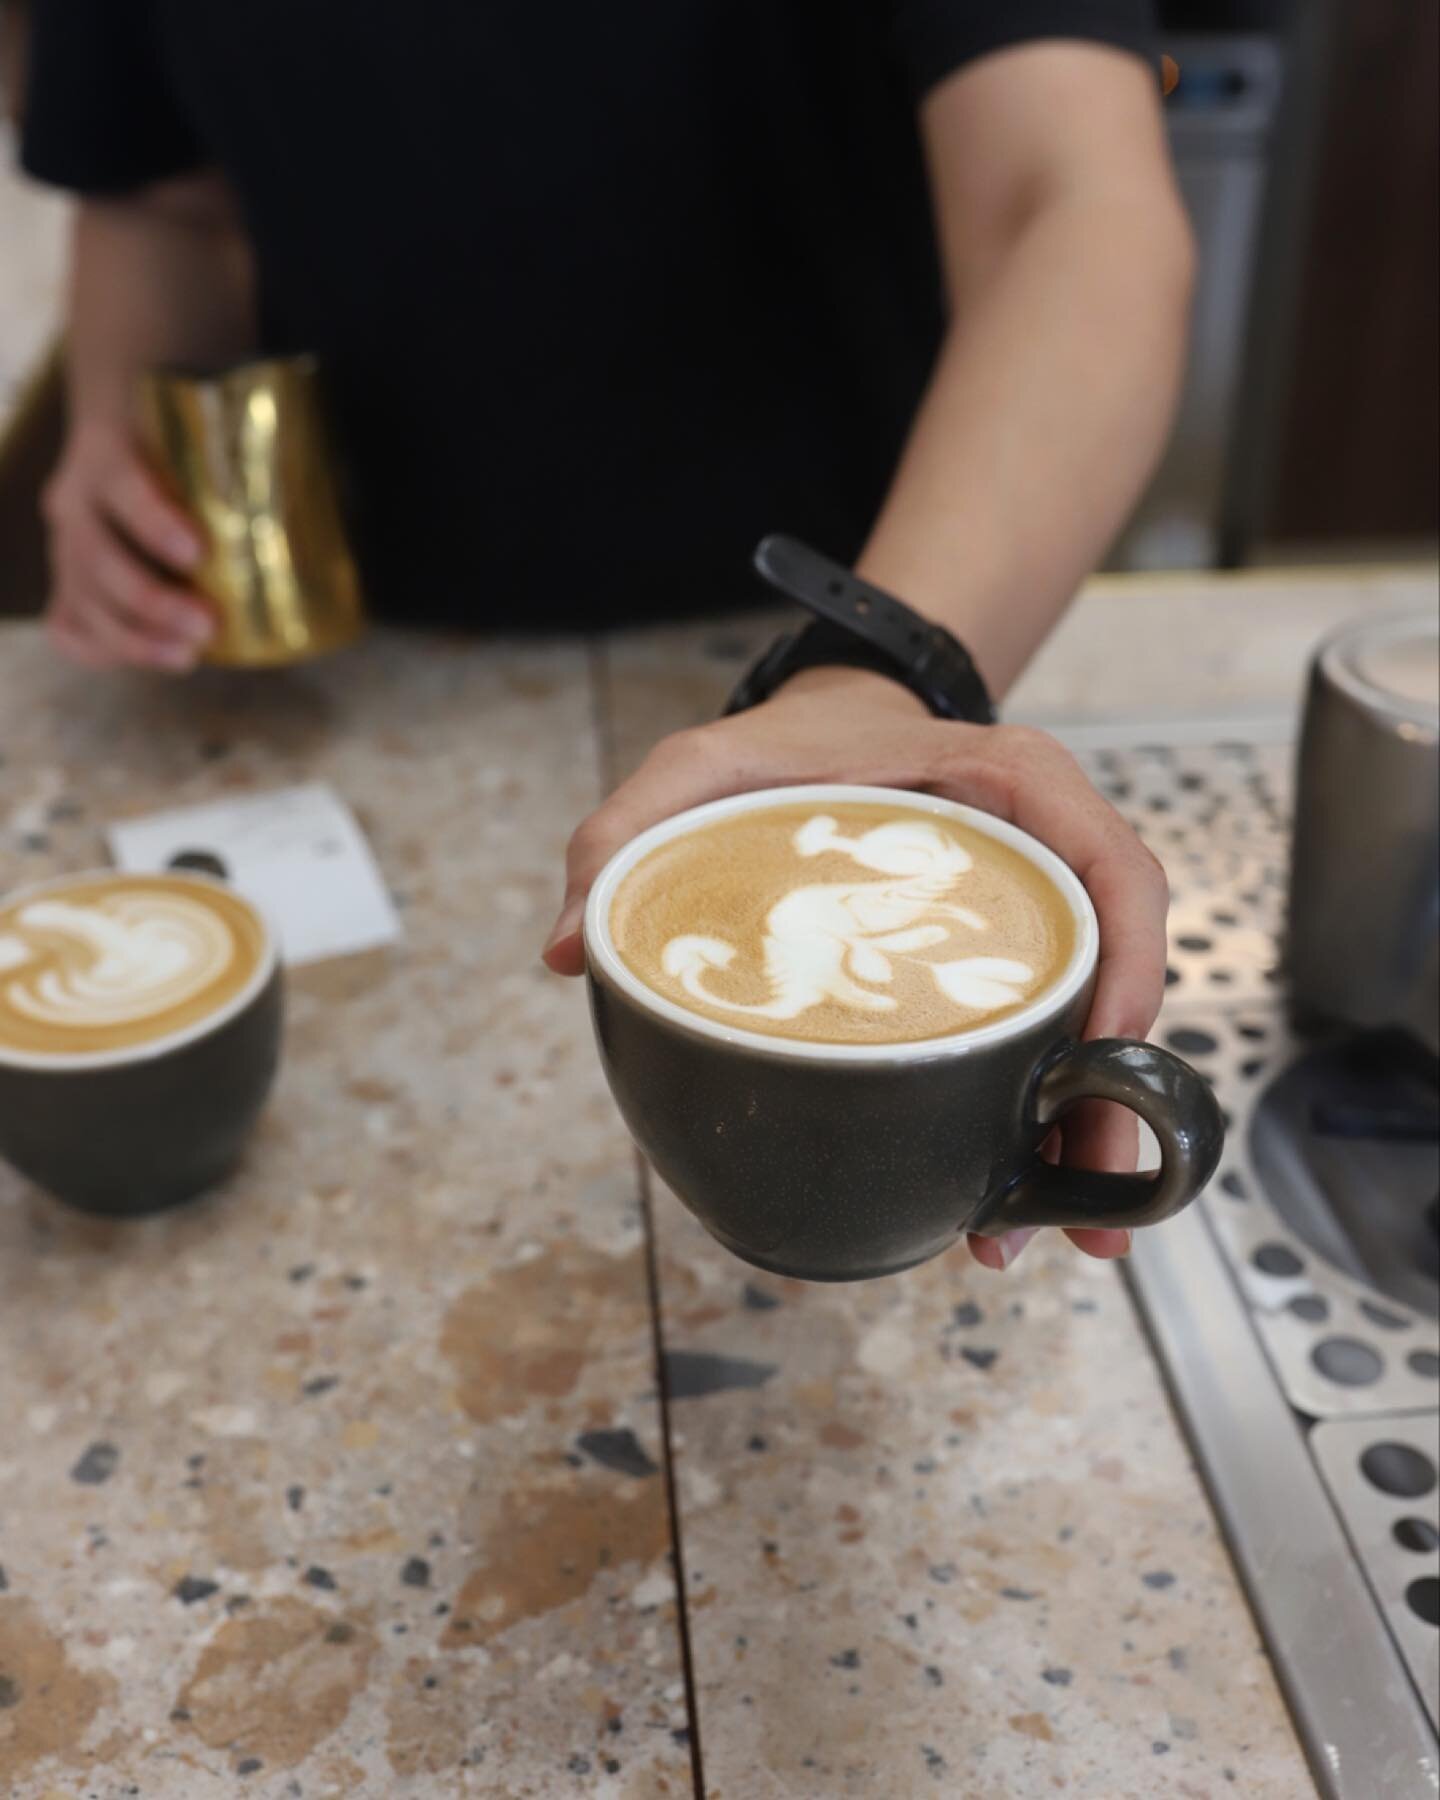 Latte art magician @chris_th0mas making your day with his impressive creations ✨